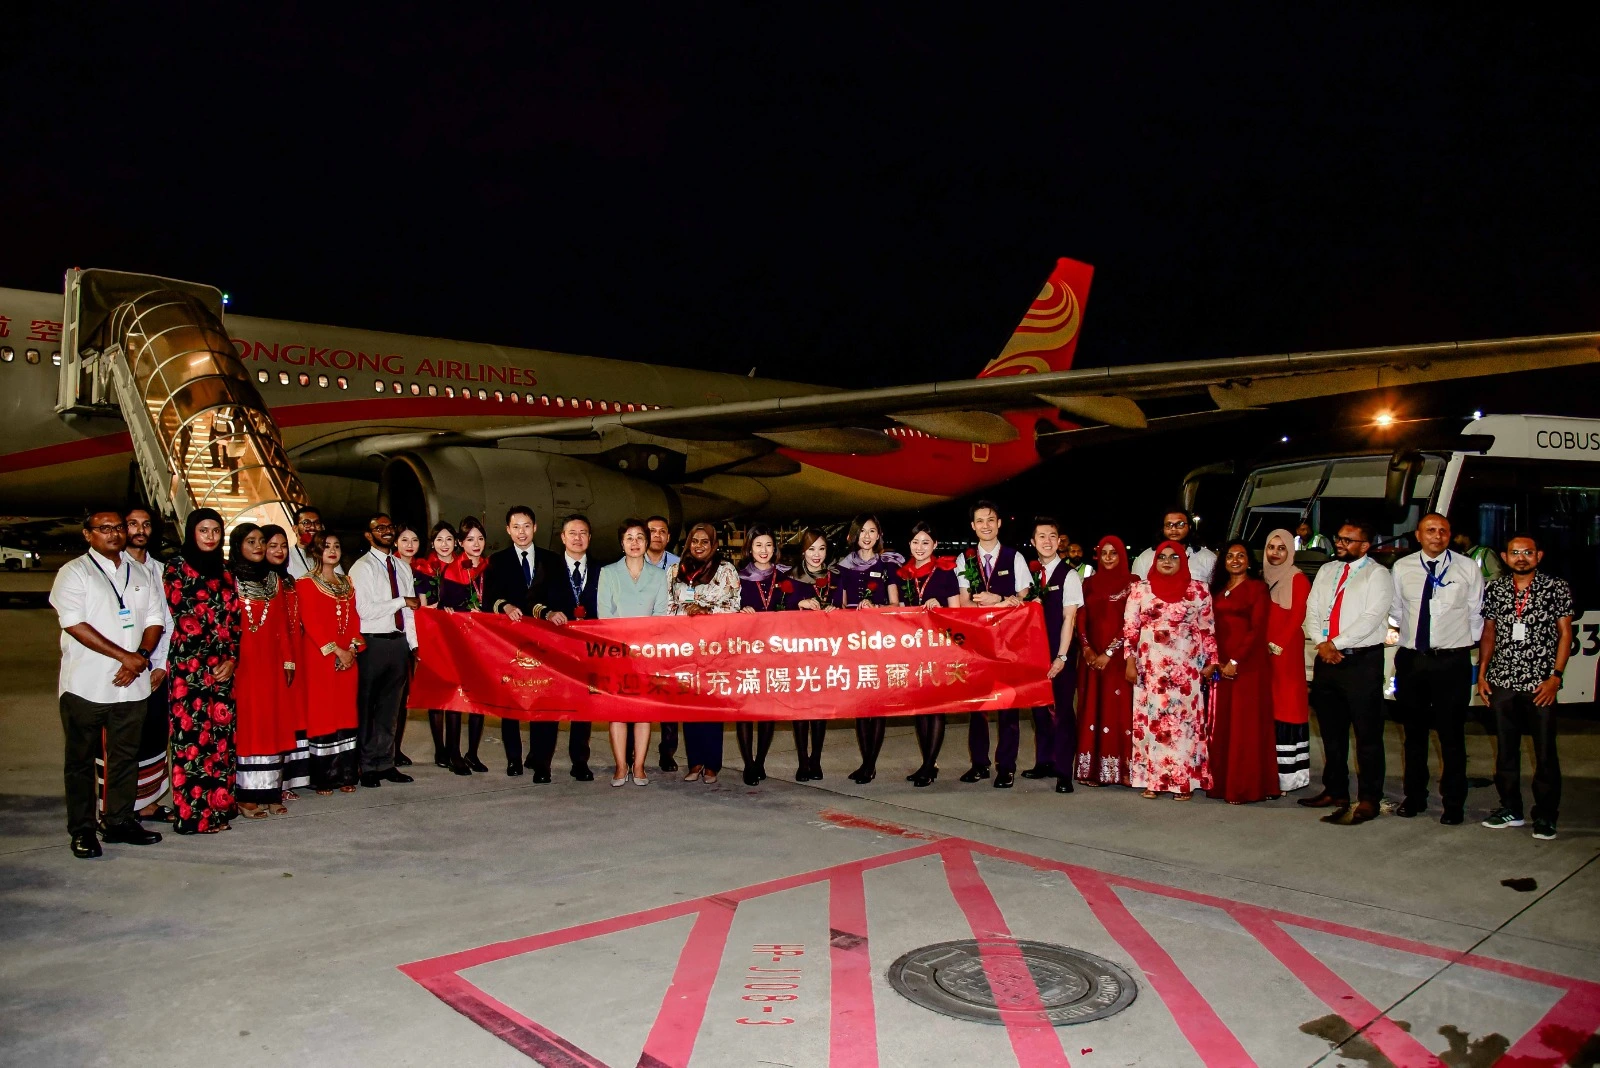 Celebrating the arrival of Hong Kong Airlines.